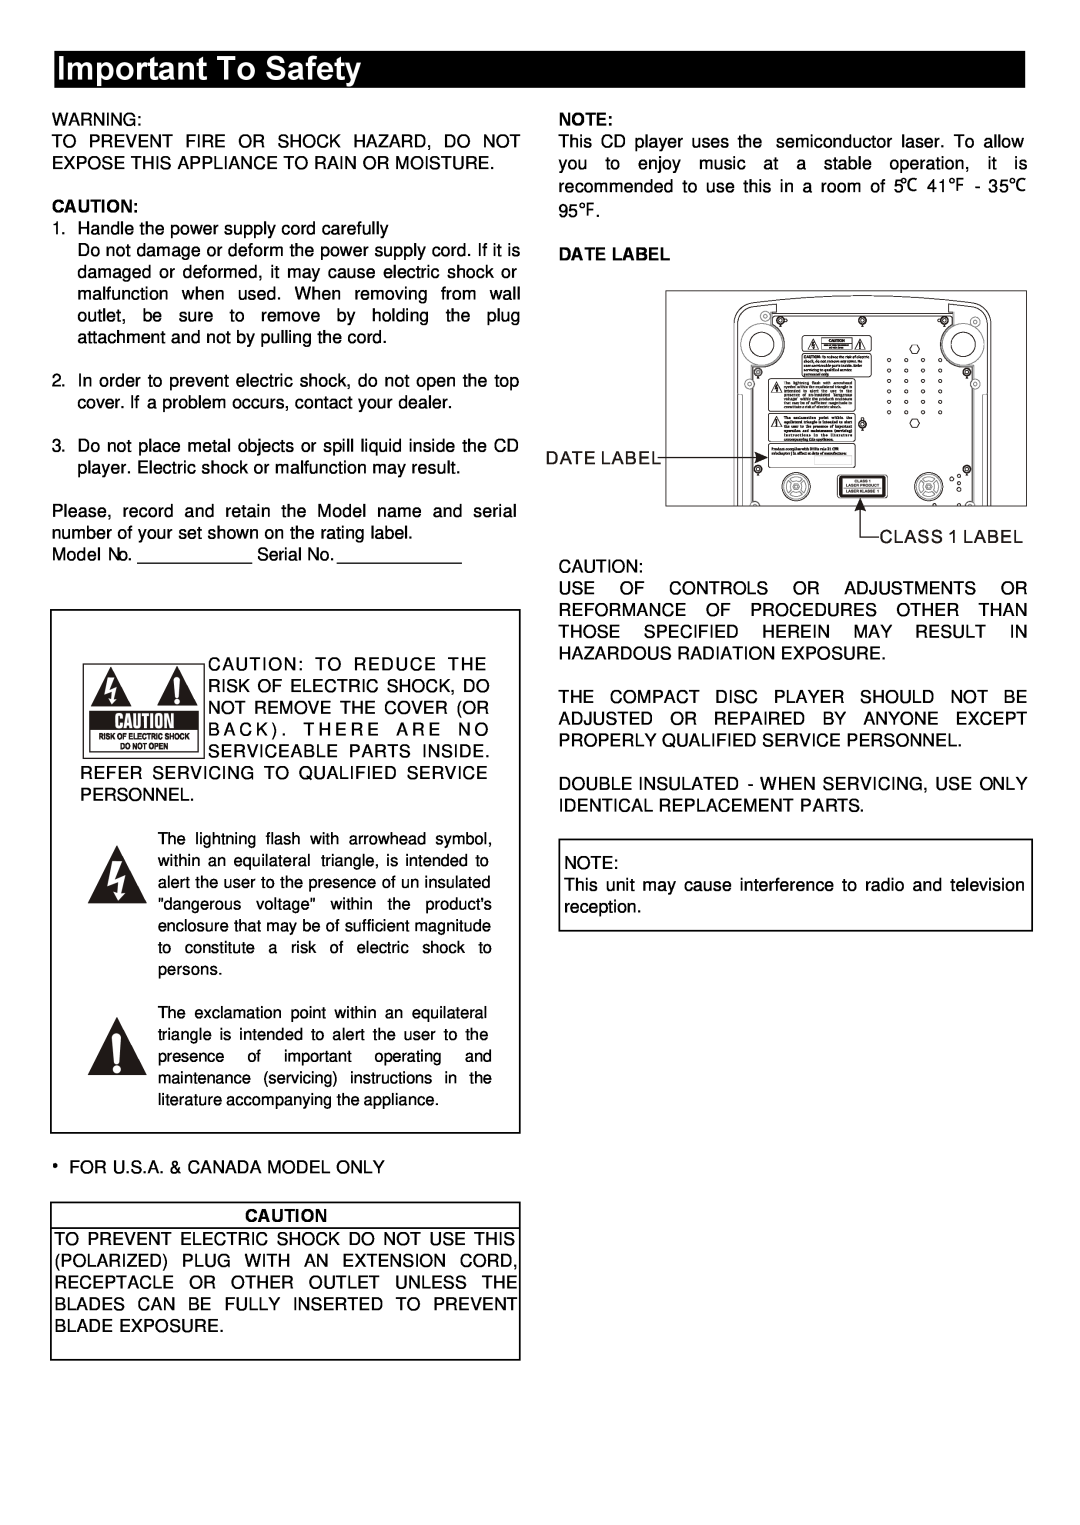 Stanton S-450 user manual Important To Safety, Date Label, DATE LABEL CLASS 1 LABEL 